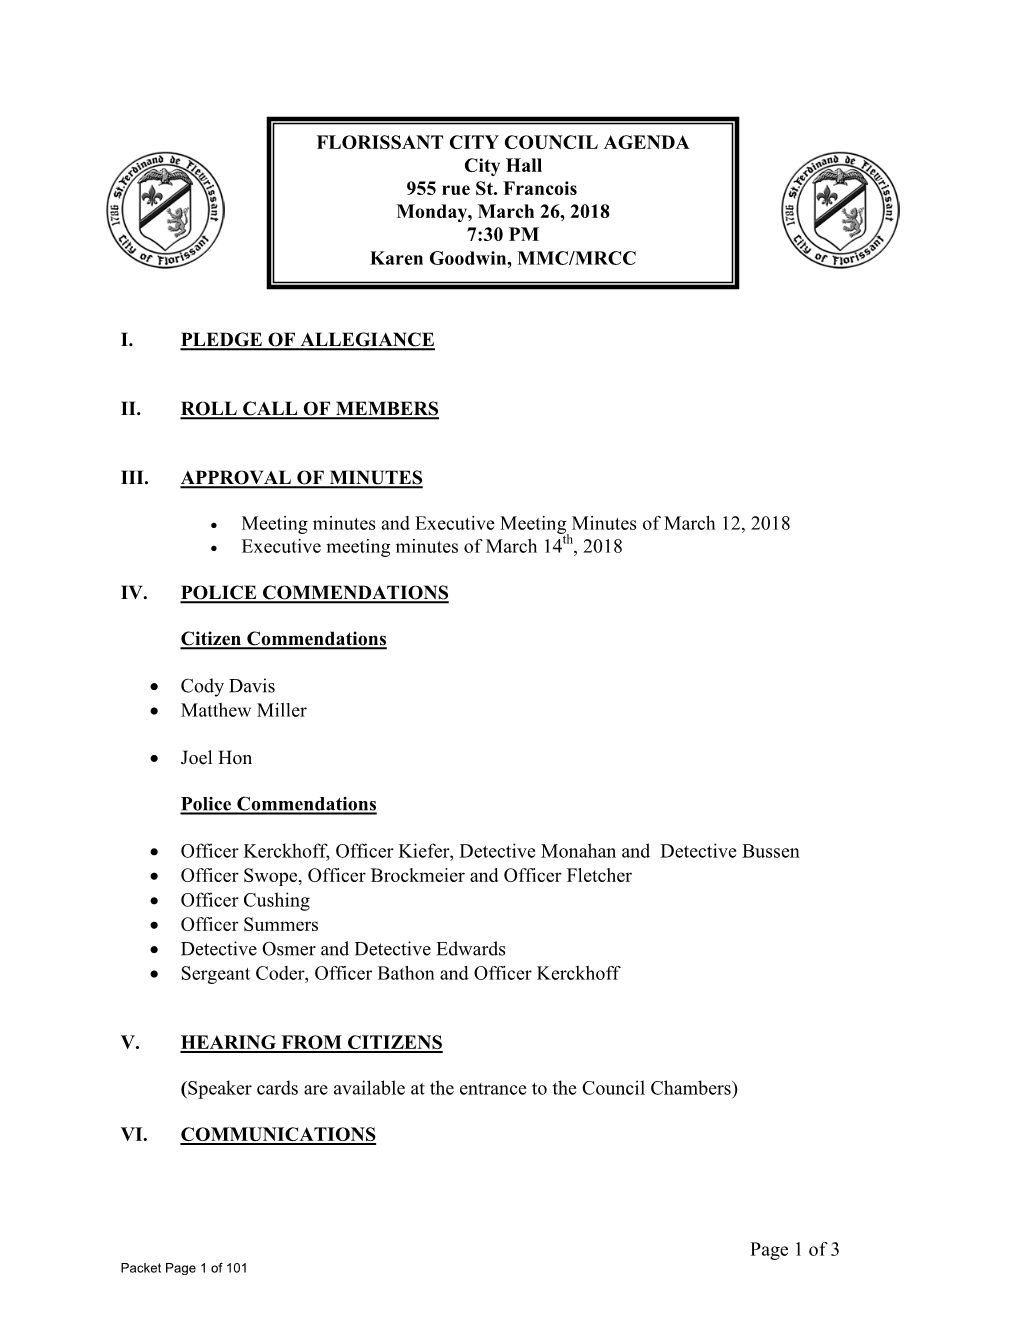 Council Meeting Agenda March 26, 2018